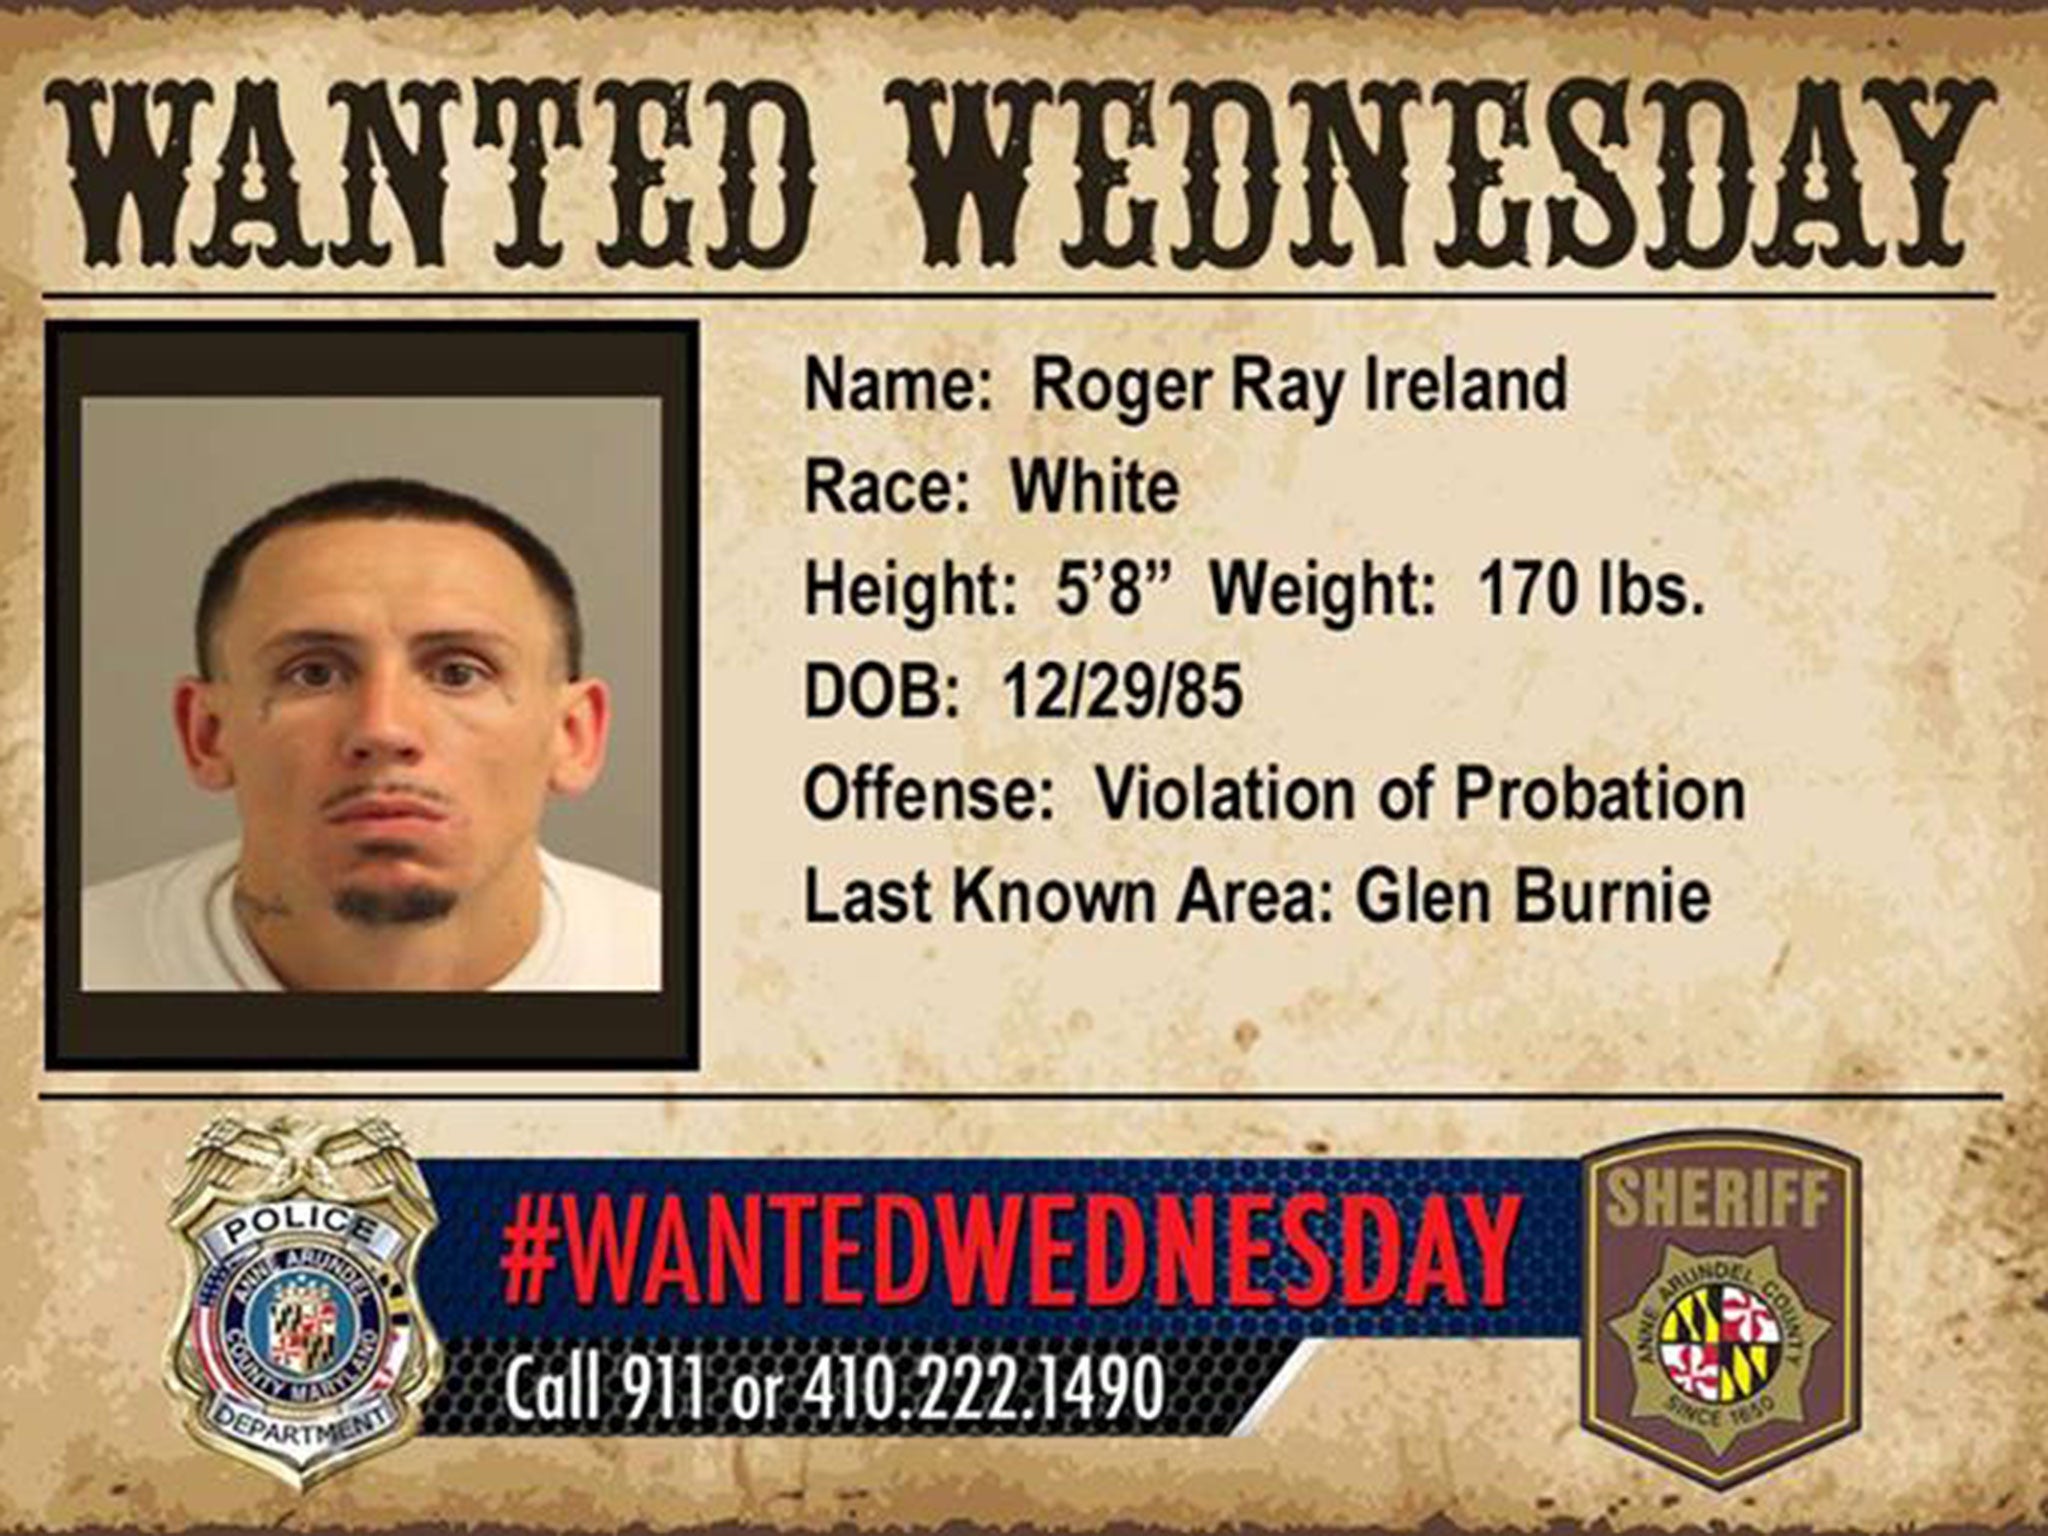 A 'Wanted Wednesday' poster by Anne Arundel County Police Department showing Roger Ray Ireland